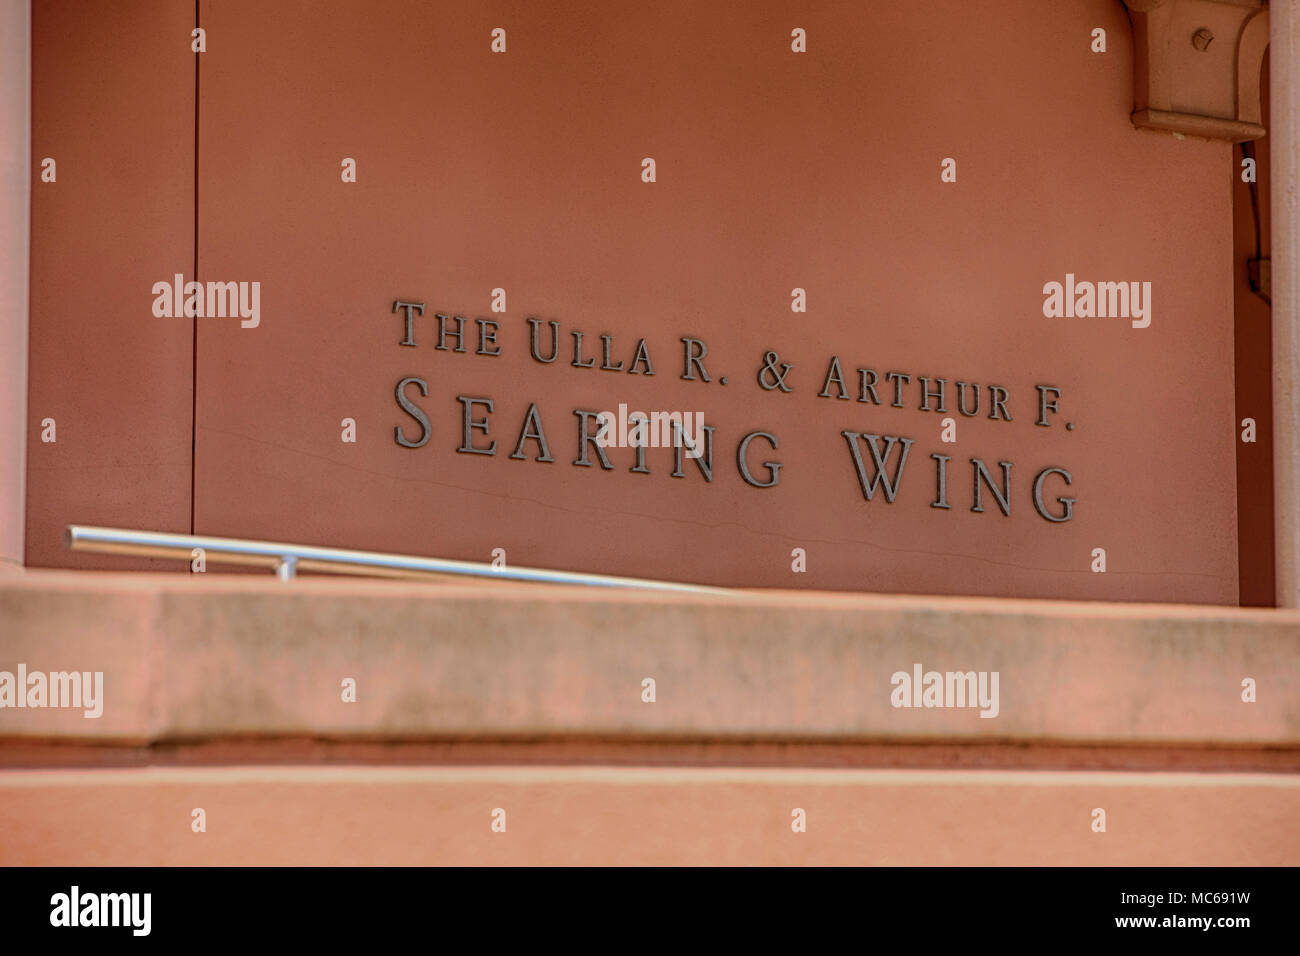 The Ulla R and Arthur F Searing Wing wall sign at the Ringling Museum of Art in Sarasota FL, USA Stock Photo